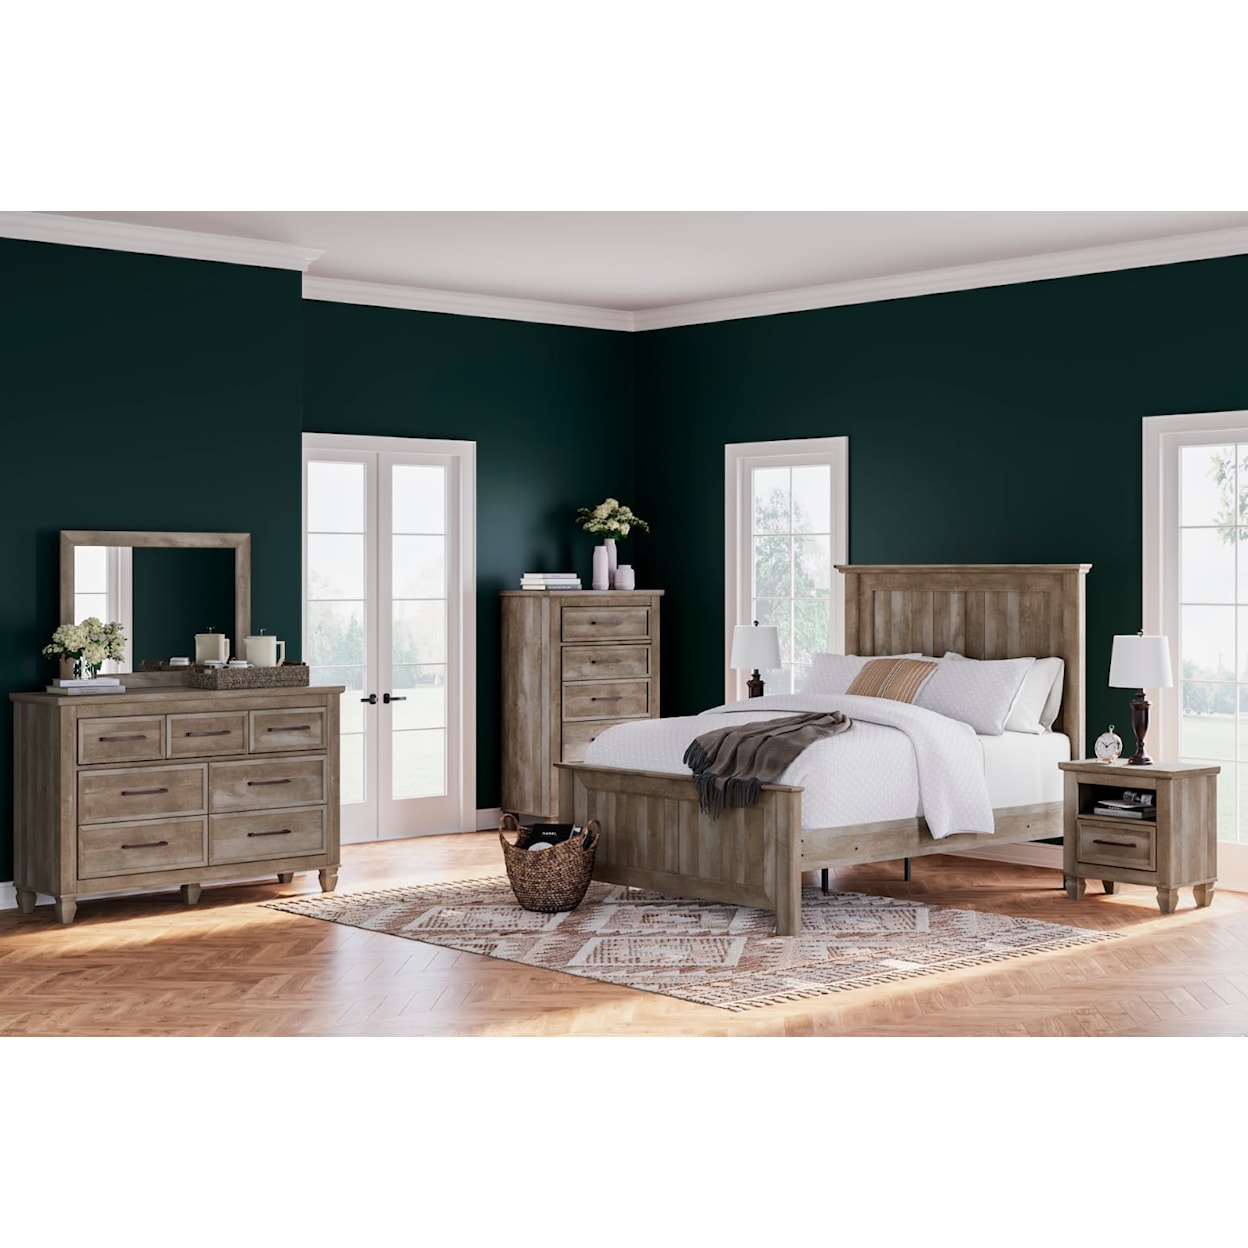 Signature Design by Ashley Yarbeck Queen Bedroom Set